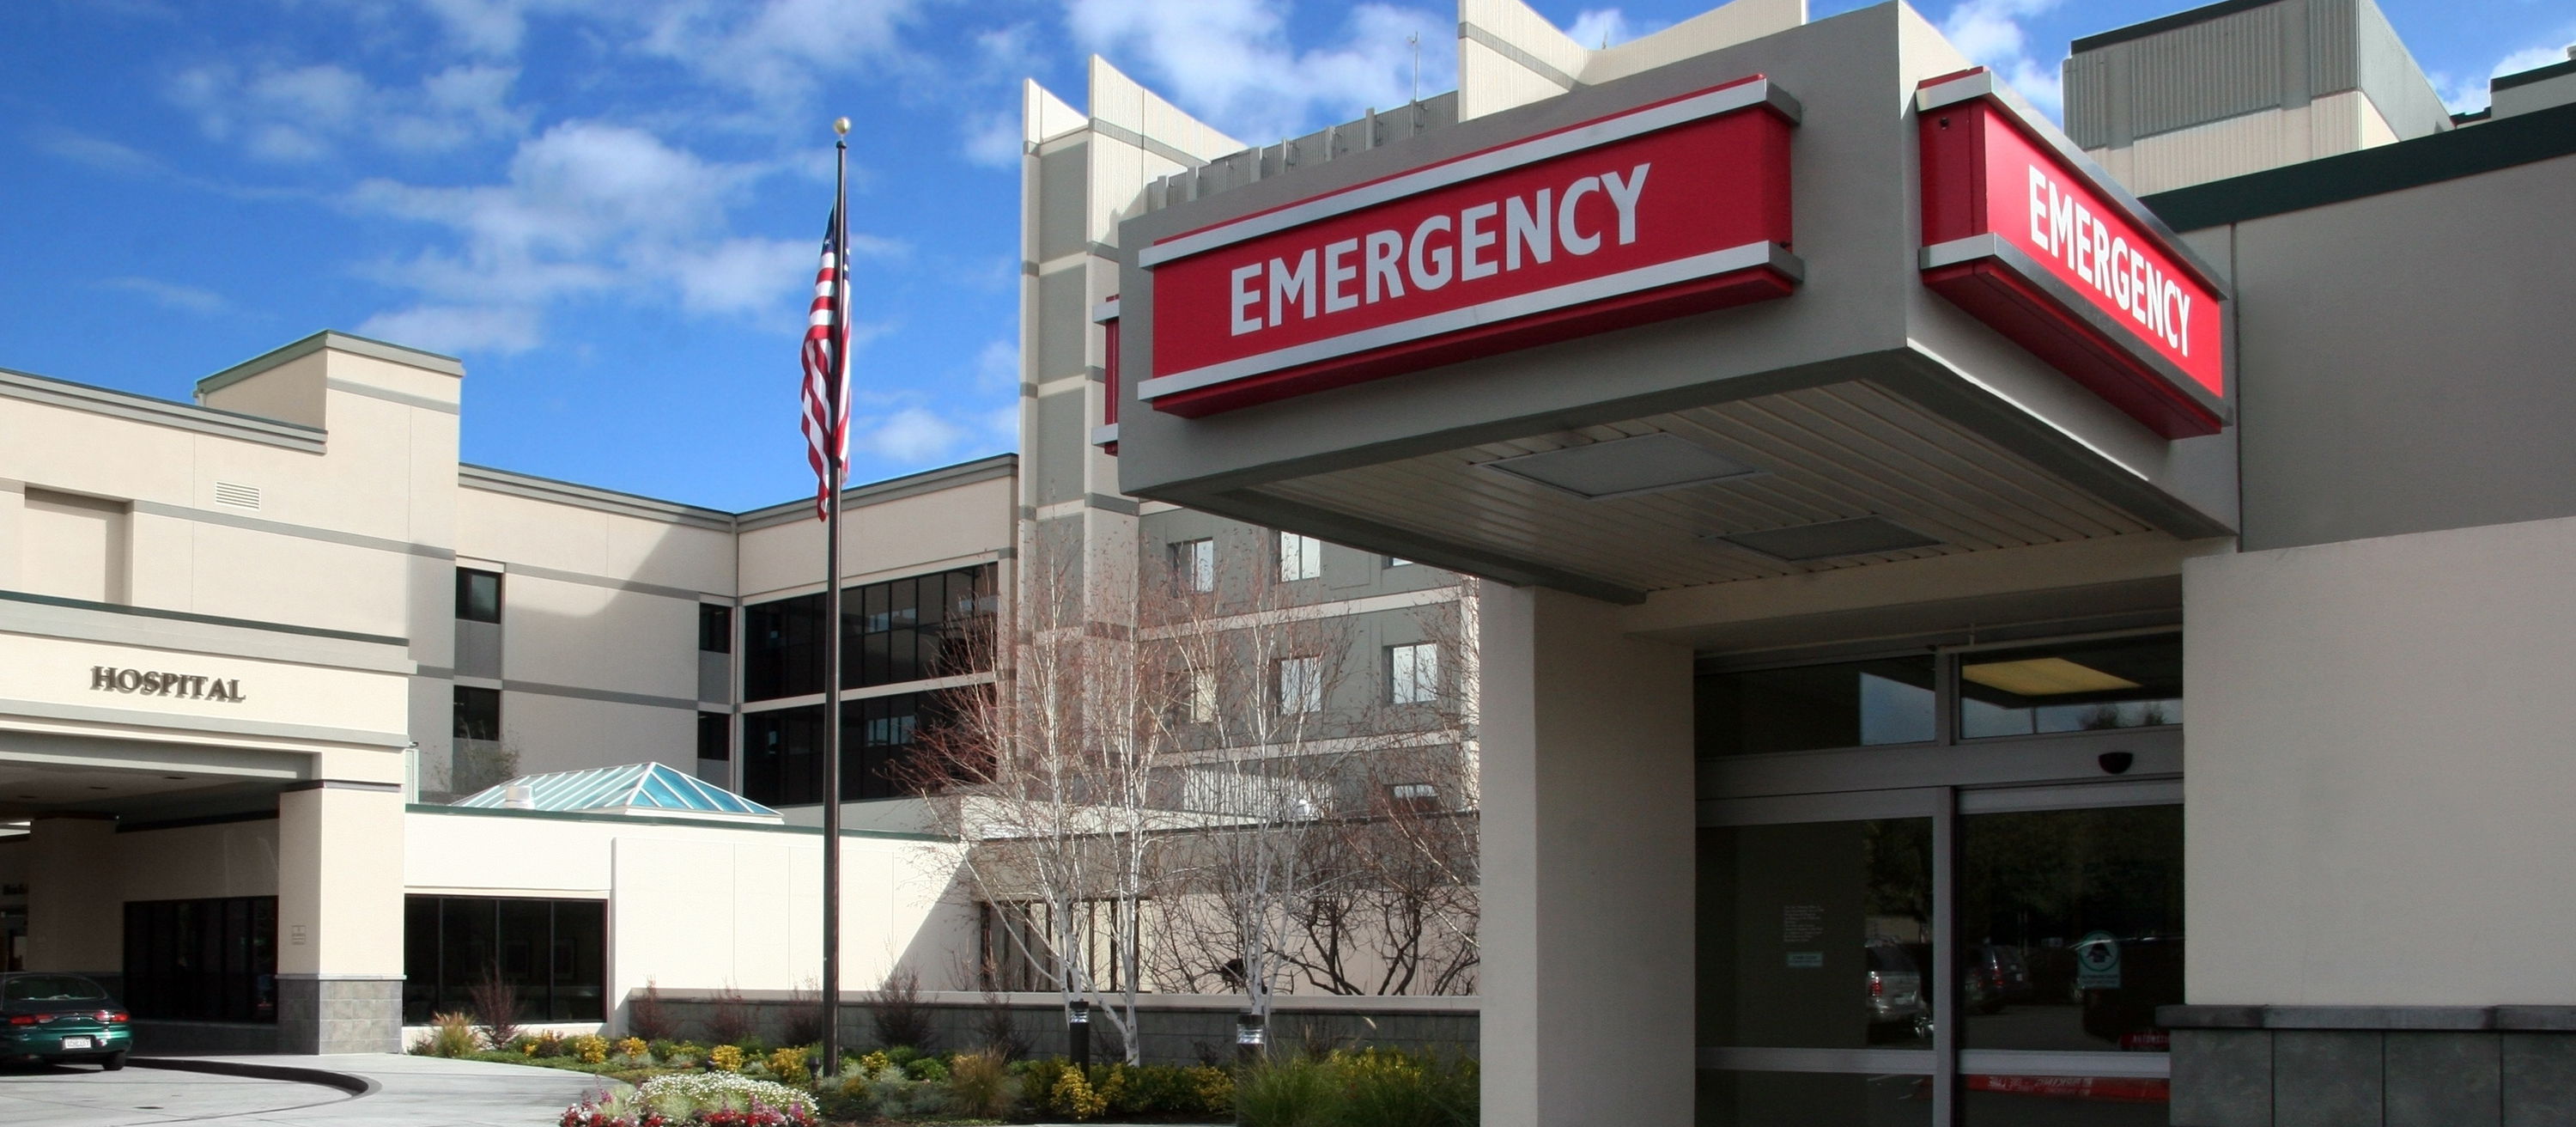 exterior of a hospital with a sign that reads EMERGENCY